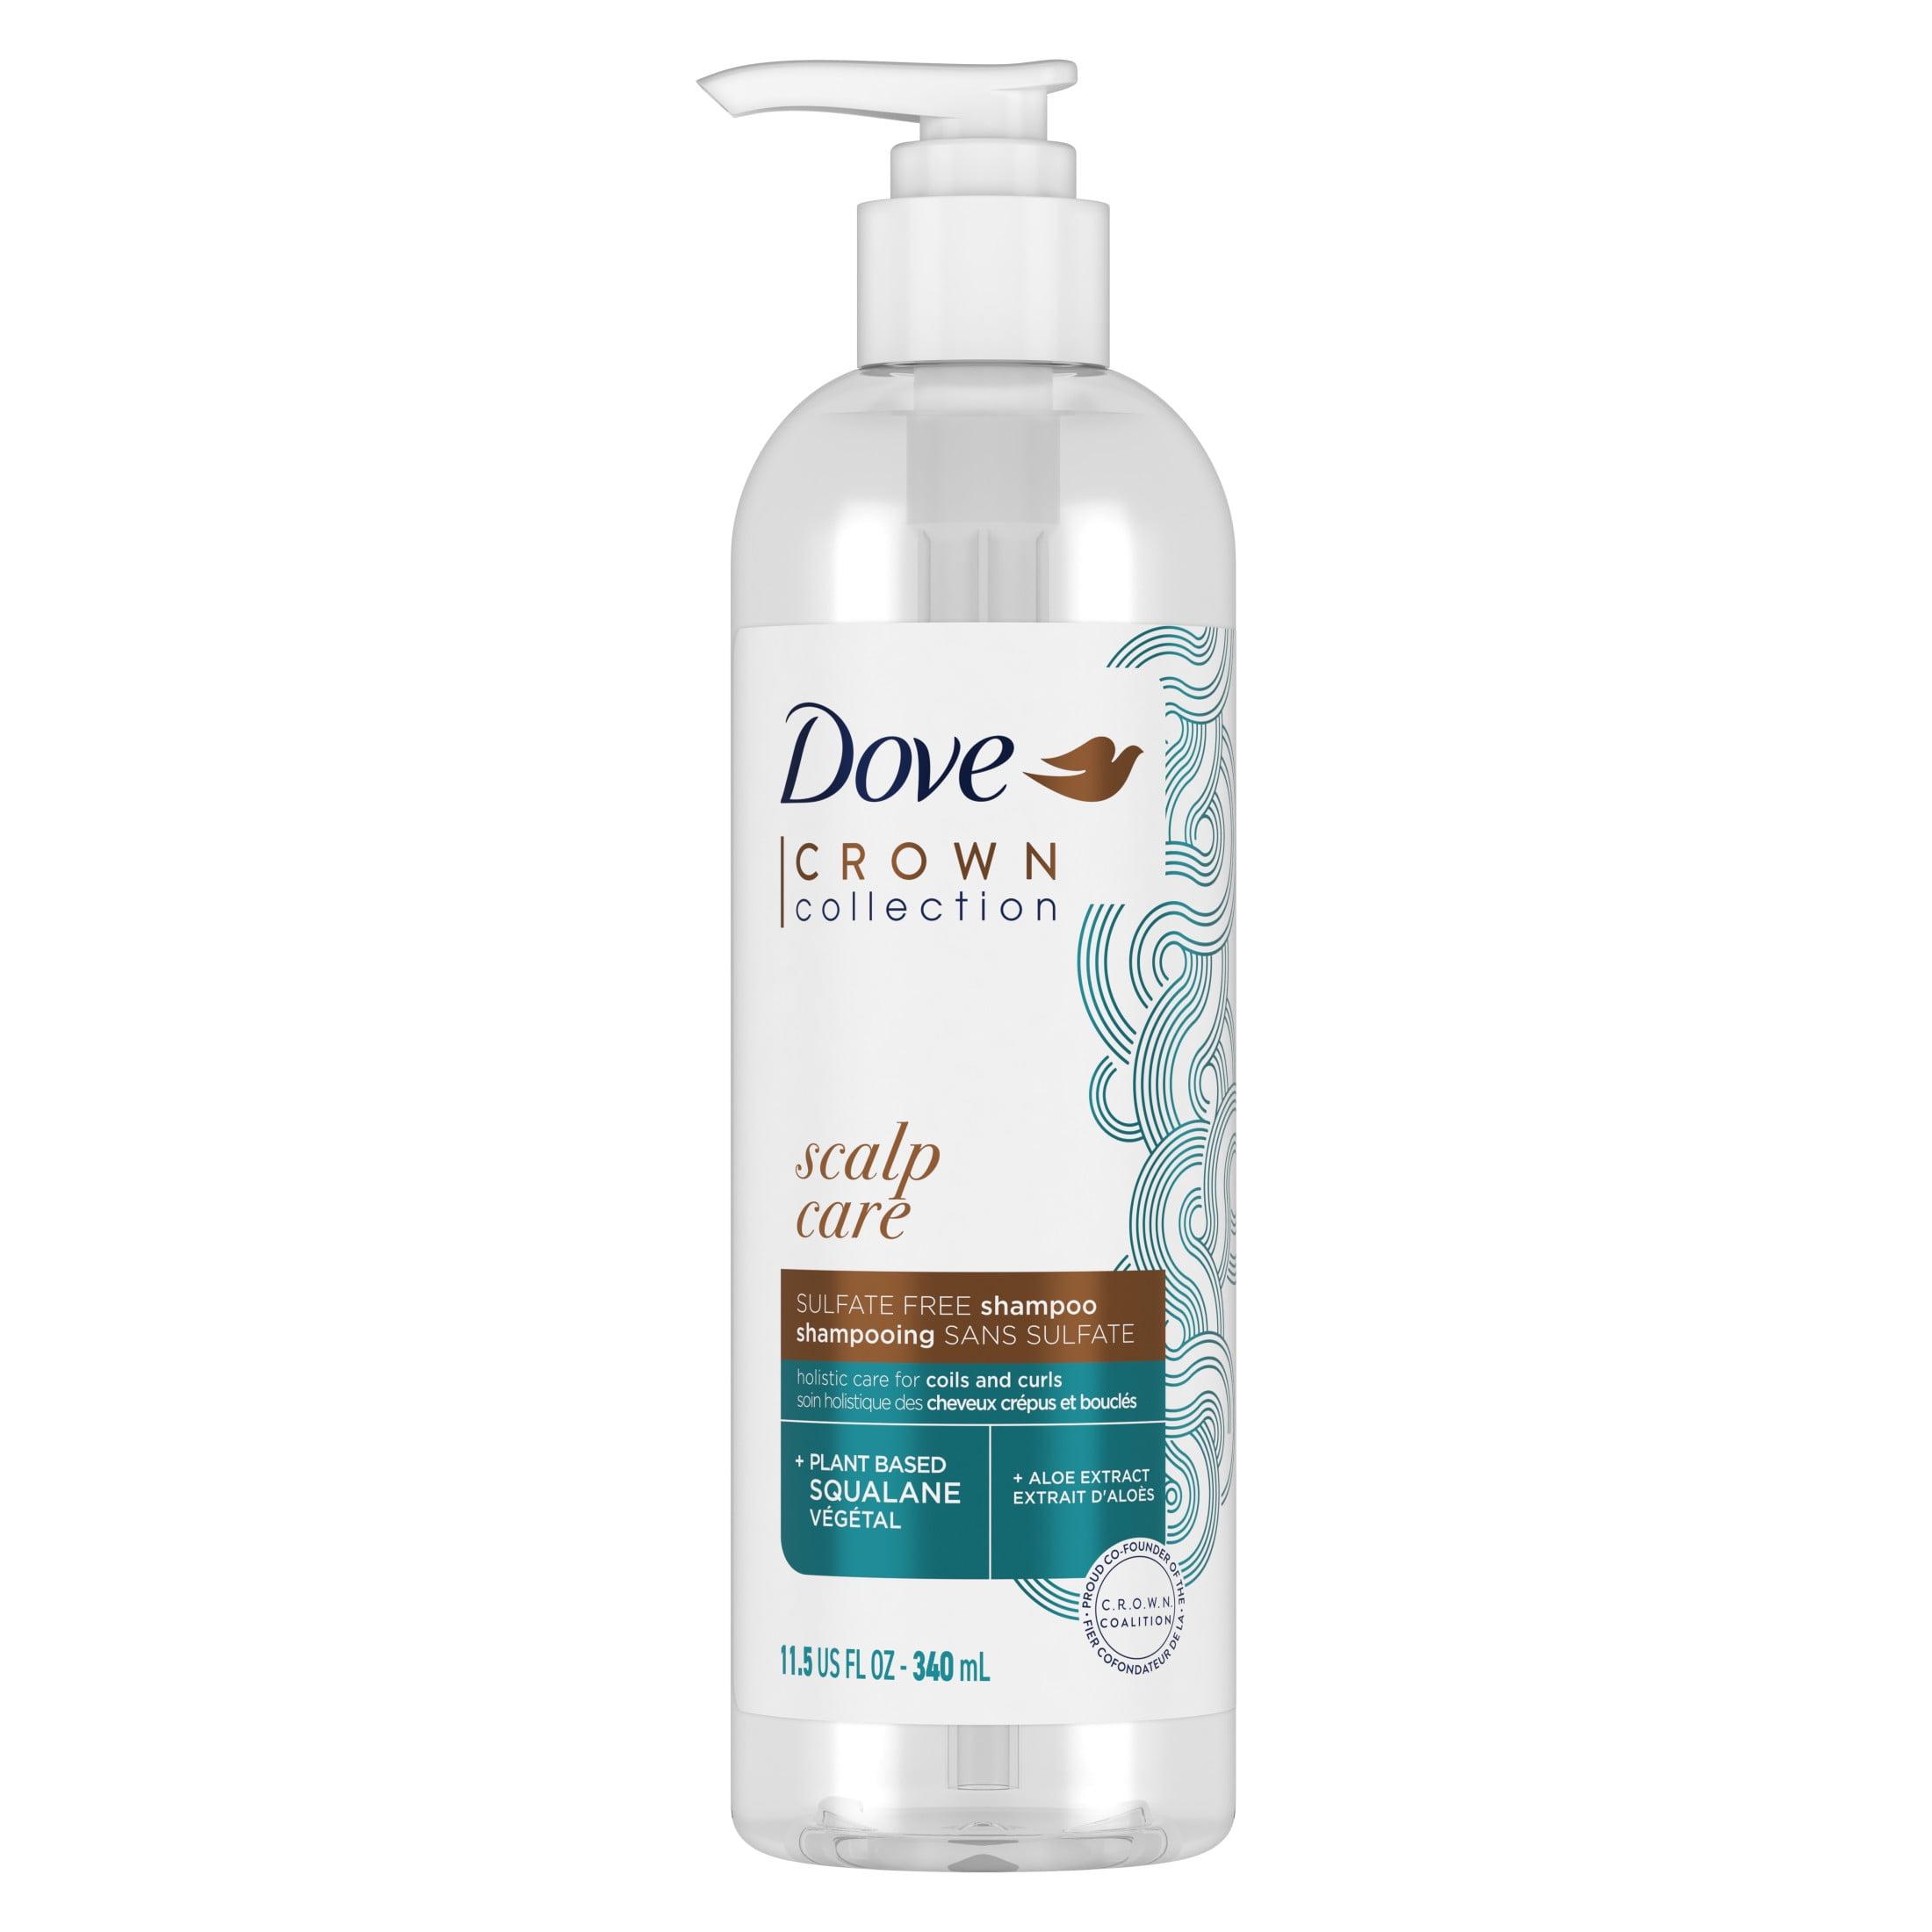 Dove Crown Collection Scalp Care Daily Shampoo for Curly Hair with Aloe Extract, 11.5 fl oz - image 1 of 10